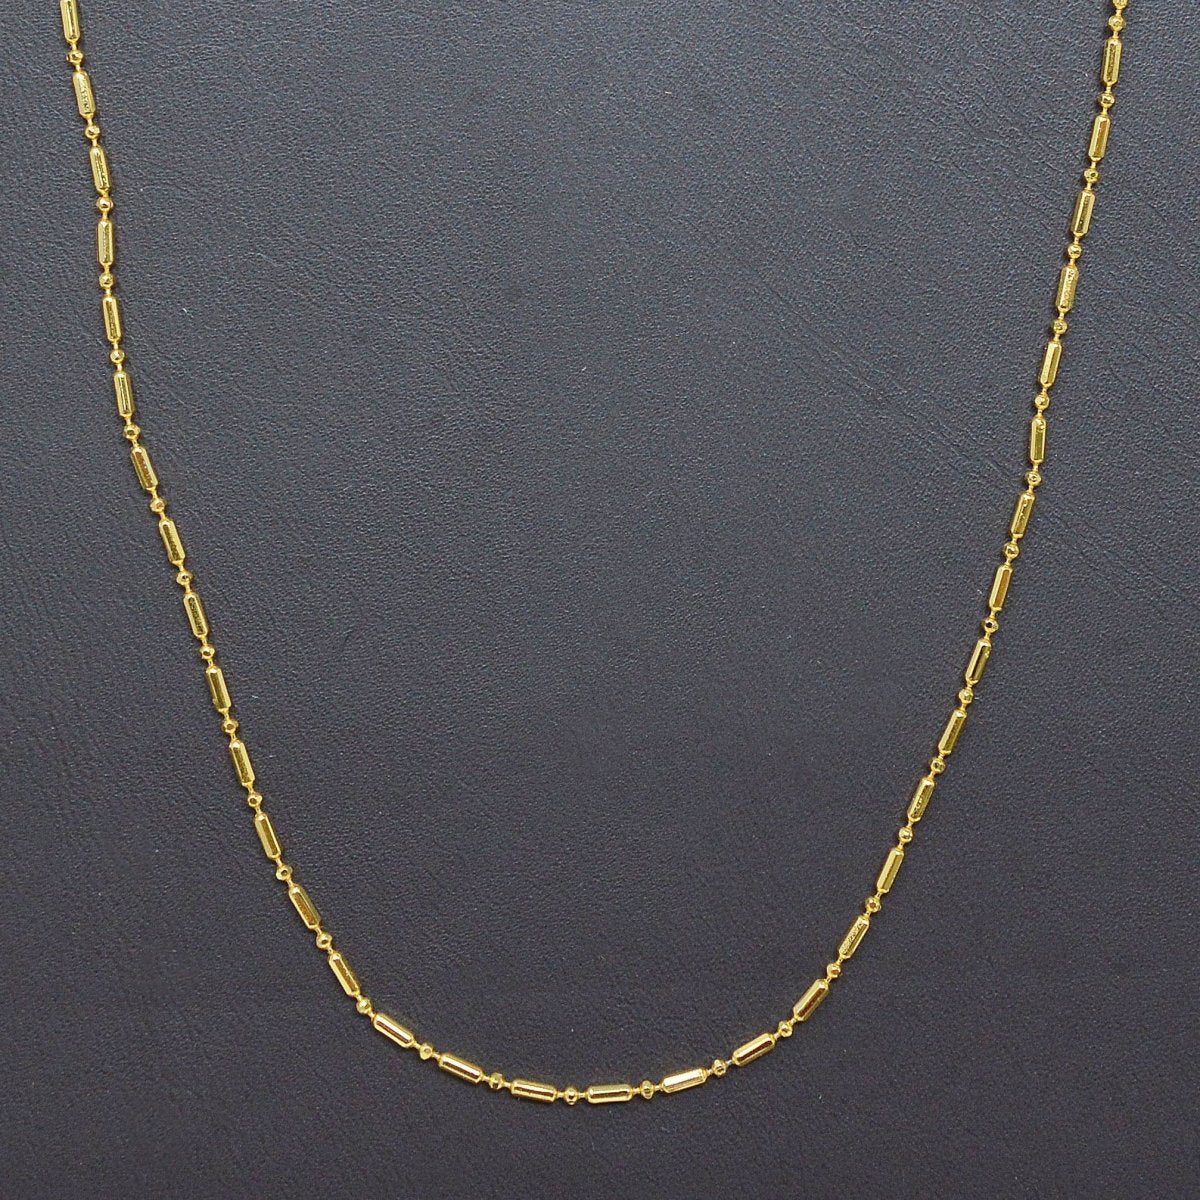 24K Gold Filled 1.2mm Tube Bar Chain, Bead Necklace 16 Inches + 2 Inches Chain Extender, Gold Cylinder Tube Bar Necklace Jewelry Making | CN-982 Clearance Pricing - DLUXCA